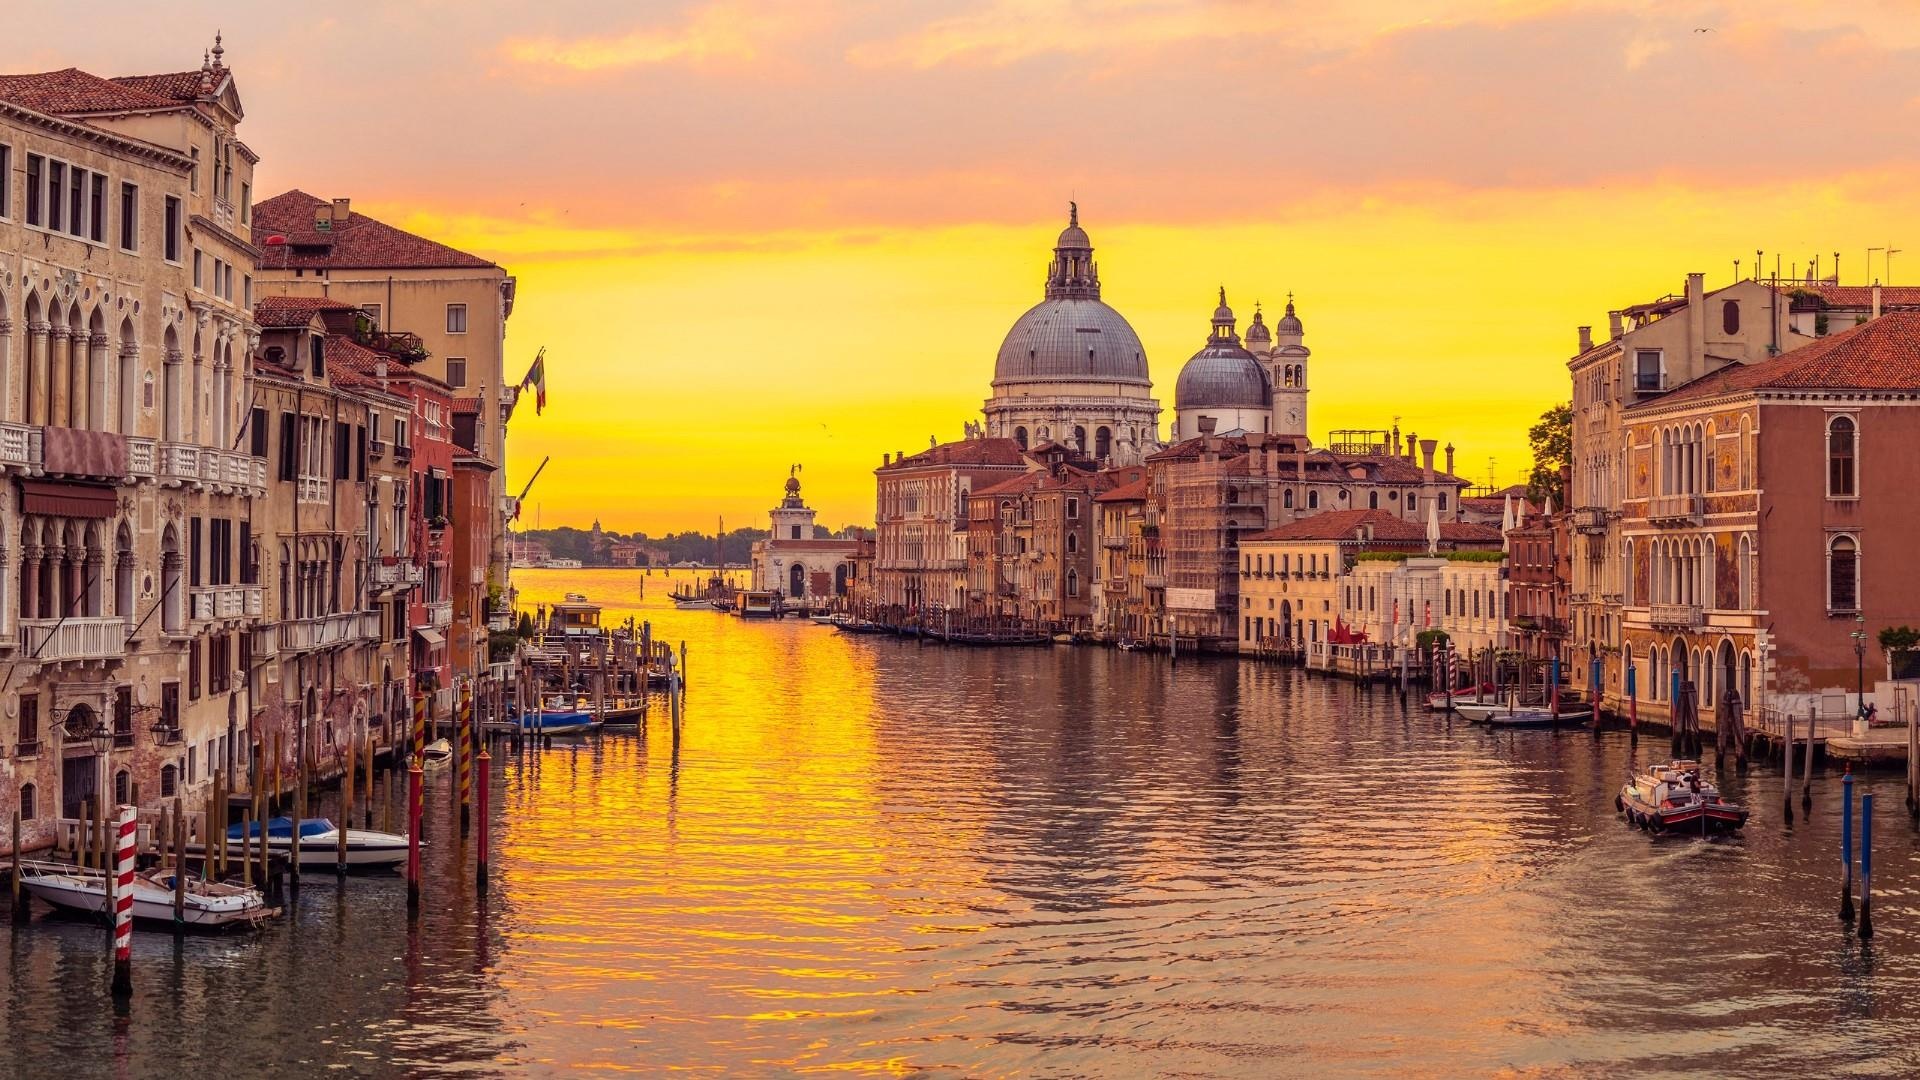 Venice: A home to the oldest Jewish ghetto in Europe, established in 1516. 1920x1080 Full HD Wallpaper.